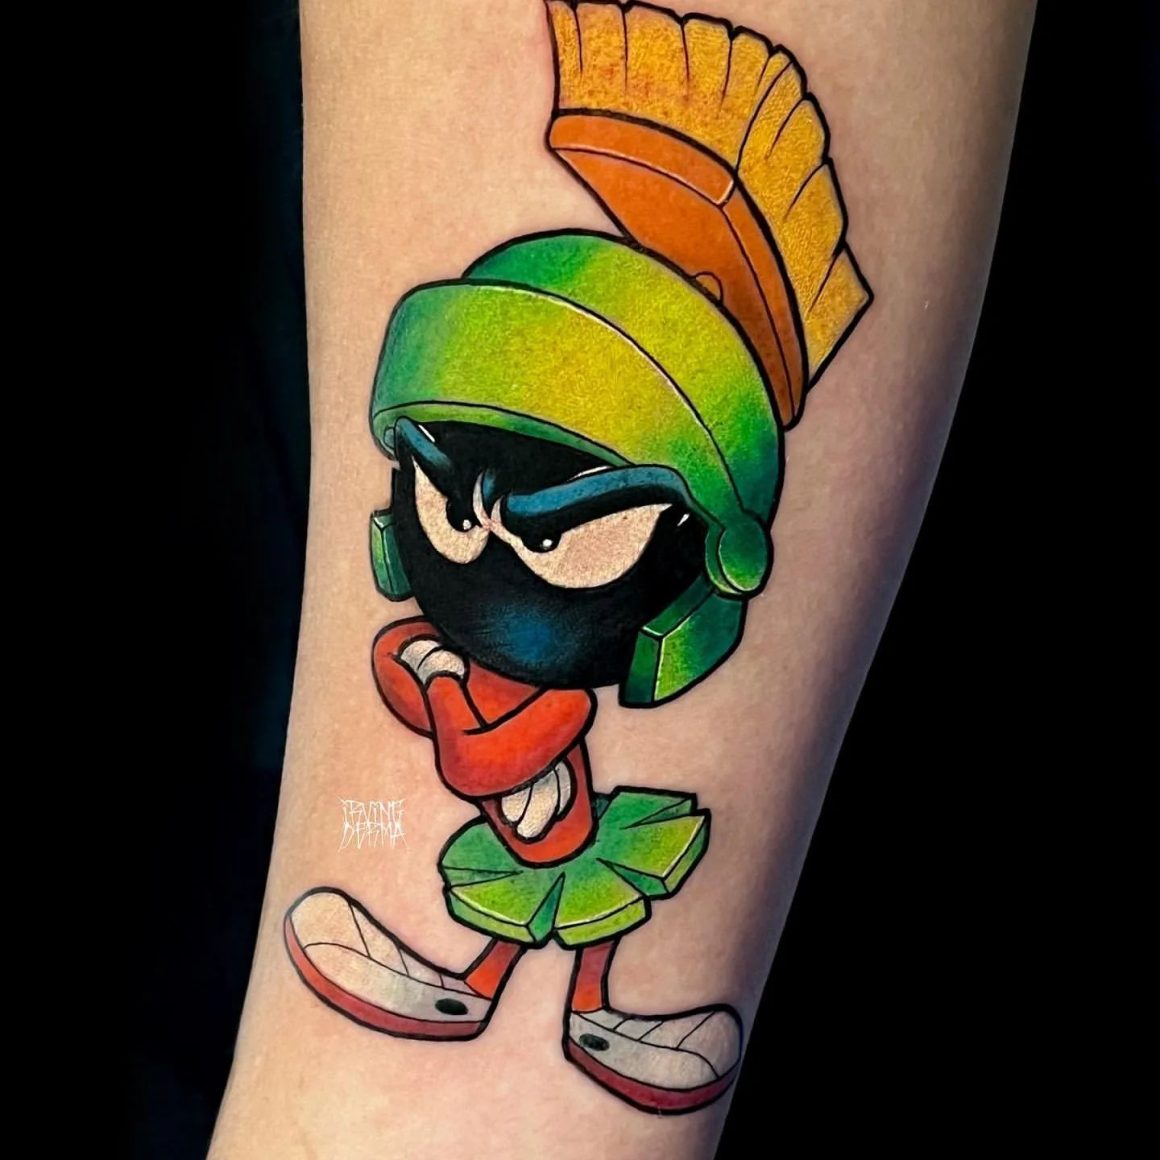 23 Marvin The Martian Tattoos For Another World